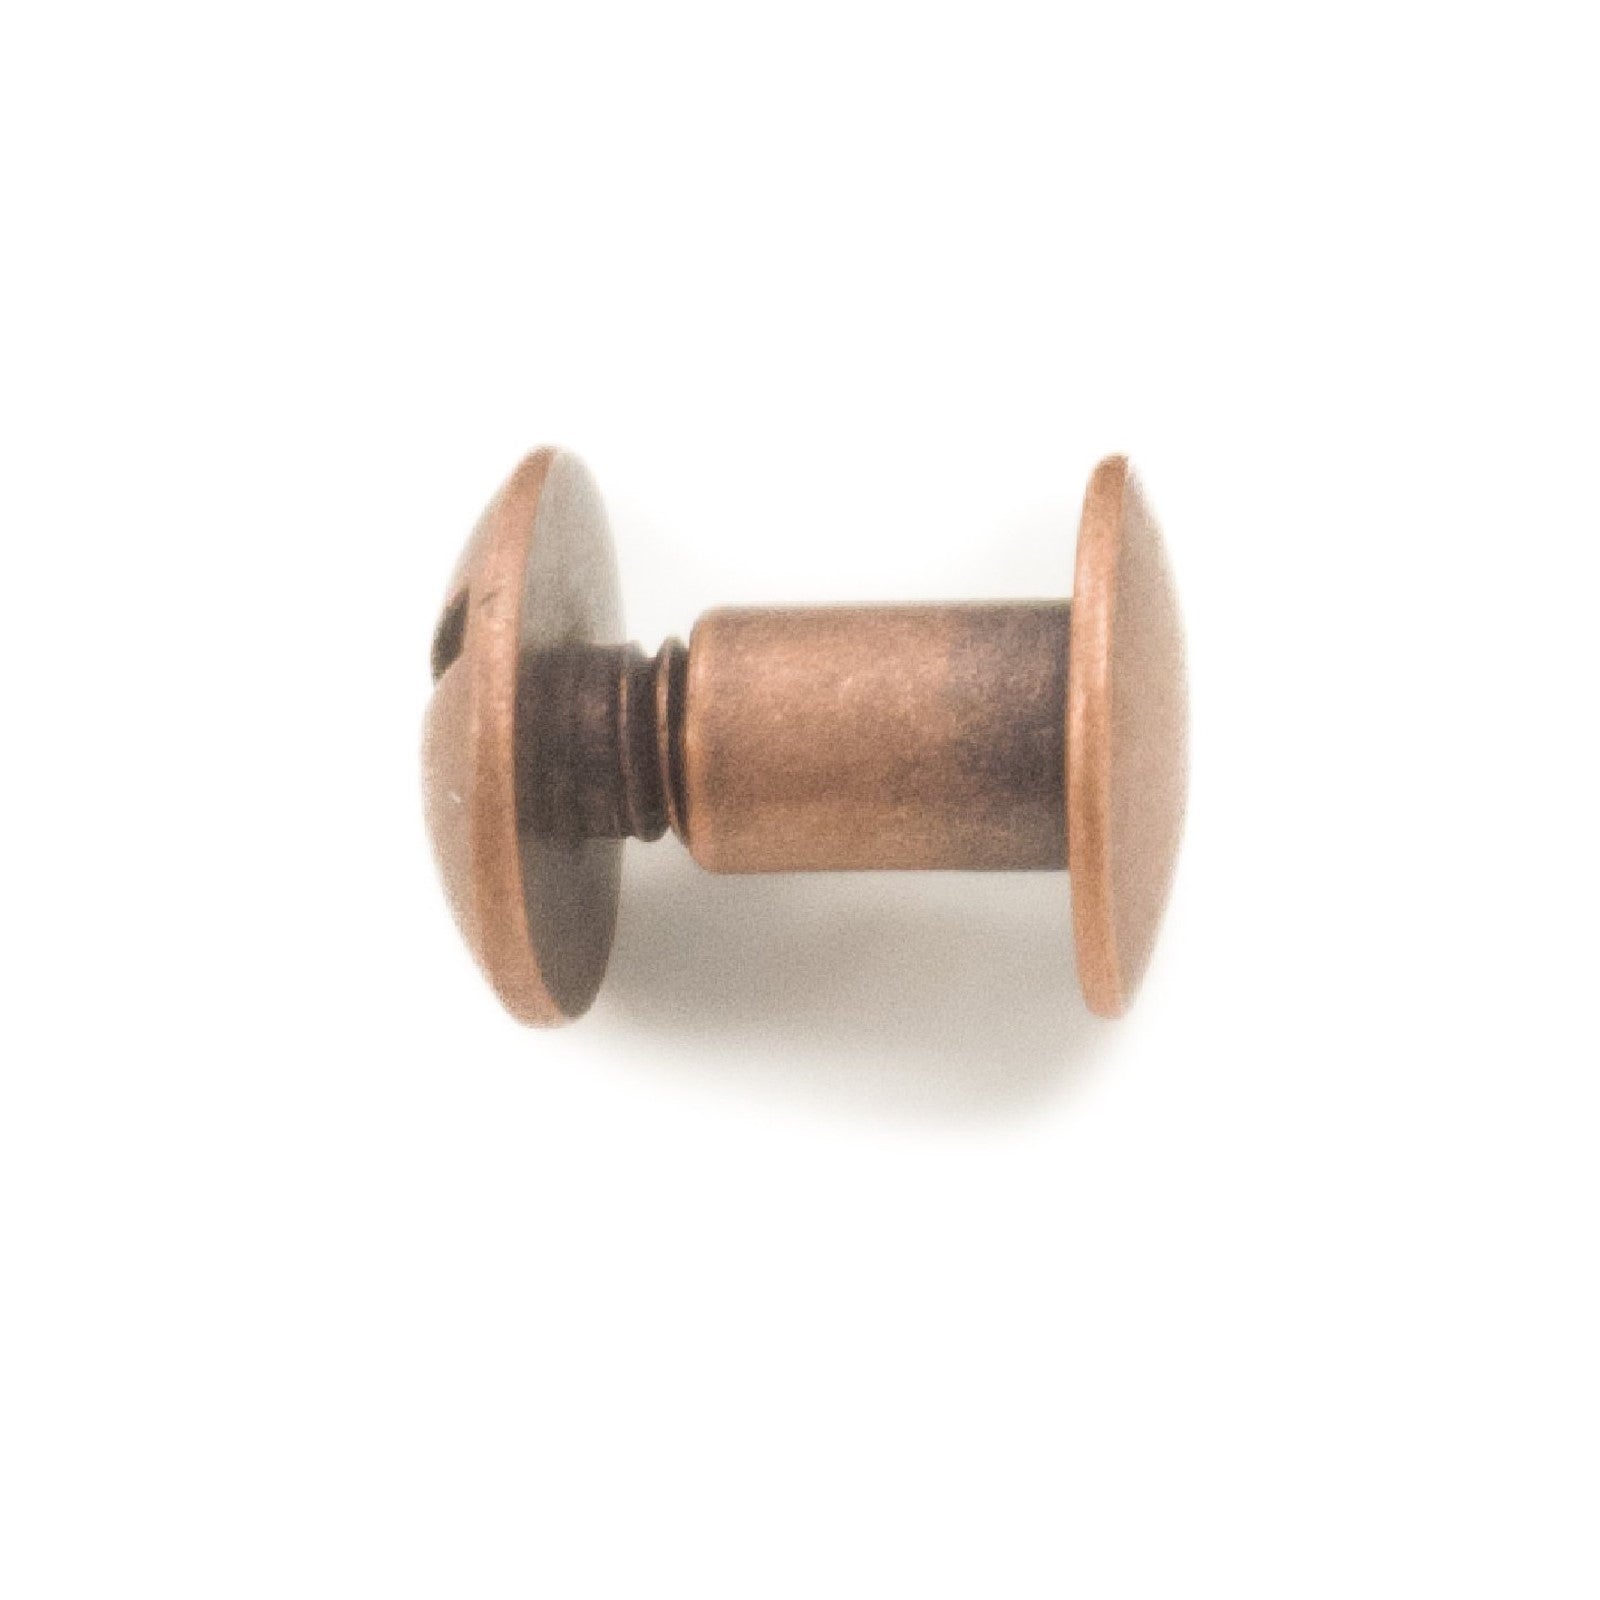 Chicago Screws, 6 mm/ 1/4", Antique Copper / 1 Piece | The Leather Guy